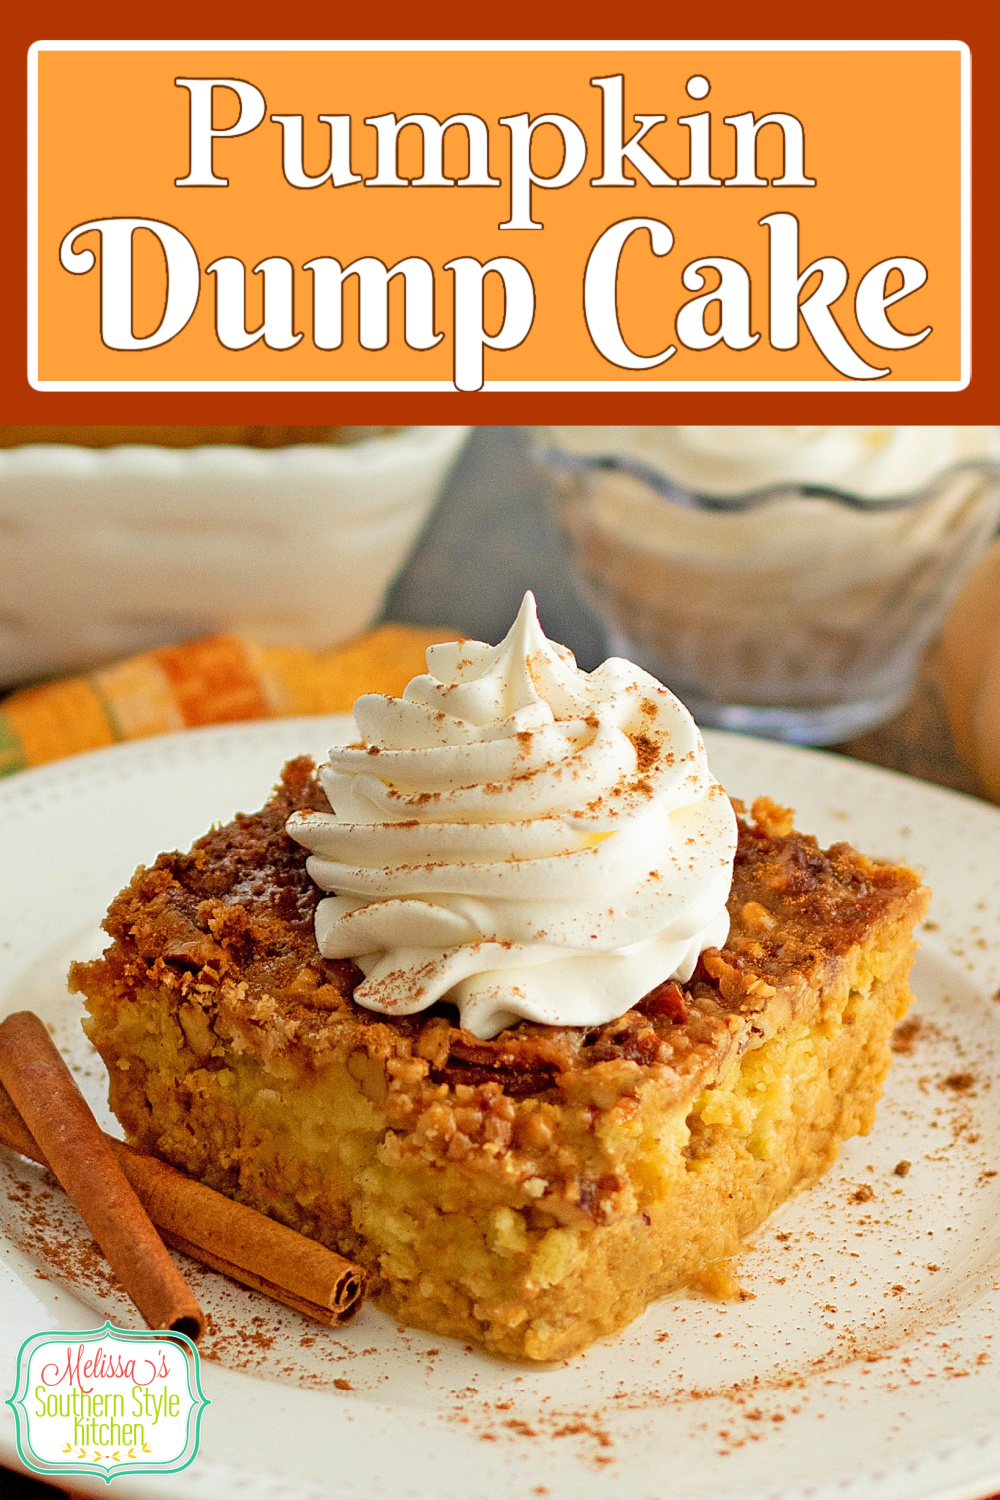 This easy Pumpkin Dump Cake is sprinkled with an irresistible praline pecan topping ideal for fall and holiday gatherings #pumpkincake #pumpkindumpcake #dumpcakerecipes #pralinepecans #thanksgivingdesserts #easydumpcakerecipes via @melissasssk